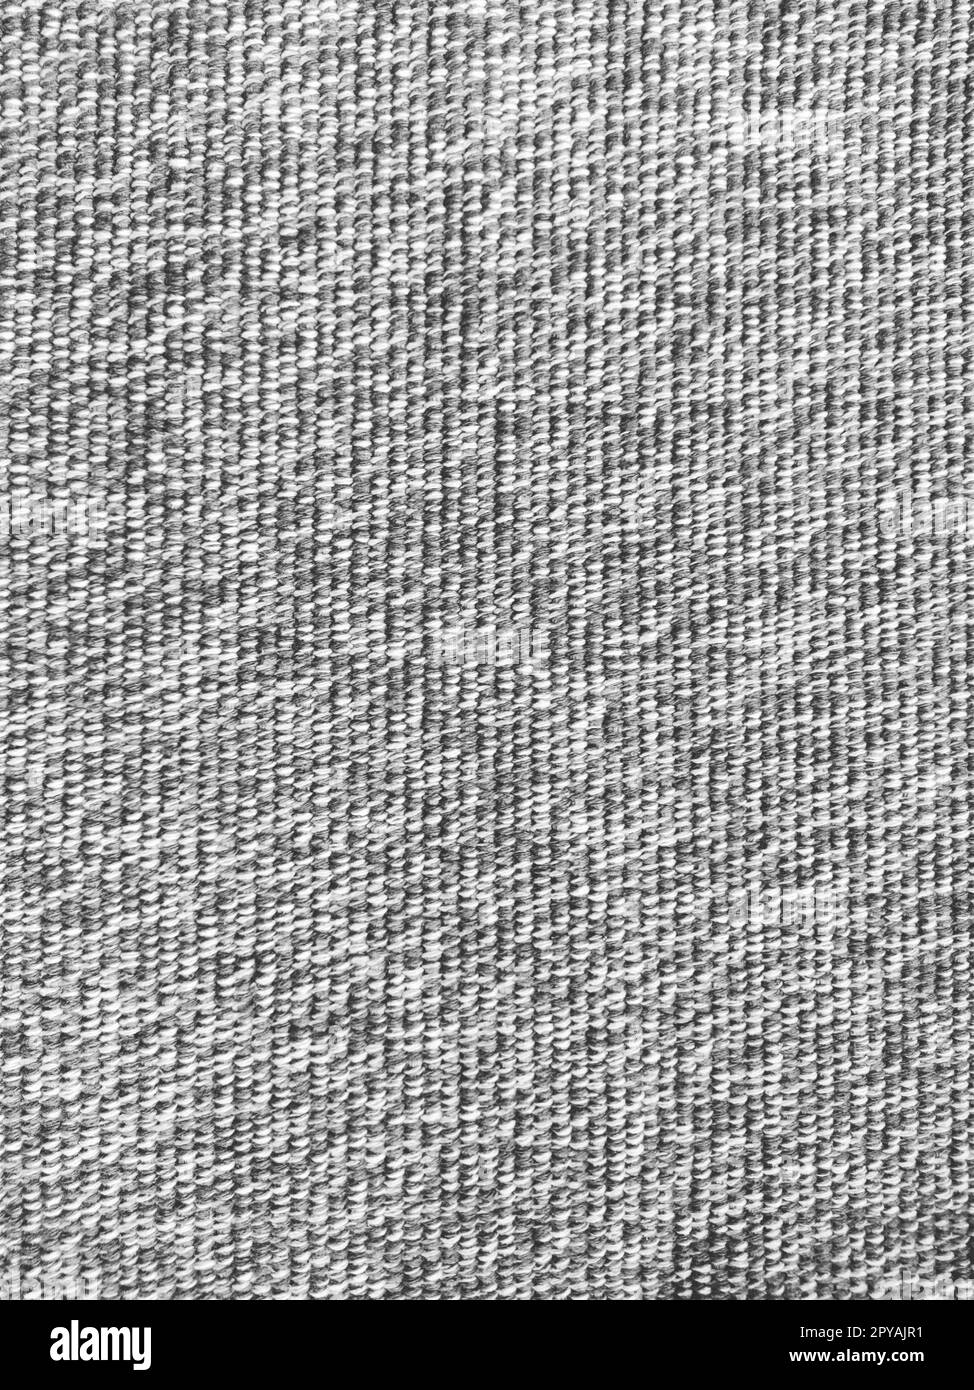 Woven coarse cotton fabric. Close-up. Black and white photography. Weaving thick threads. Smooth neat texture for the background. Stock Photo